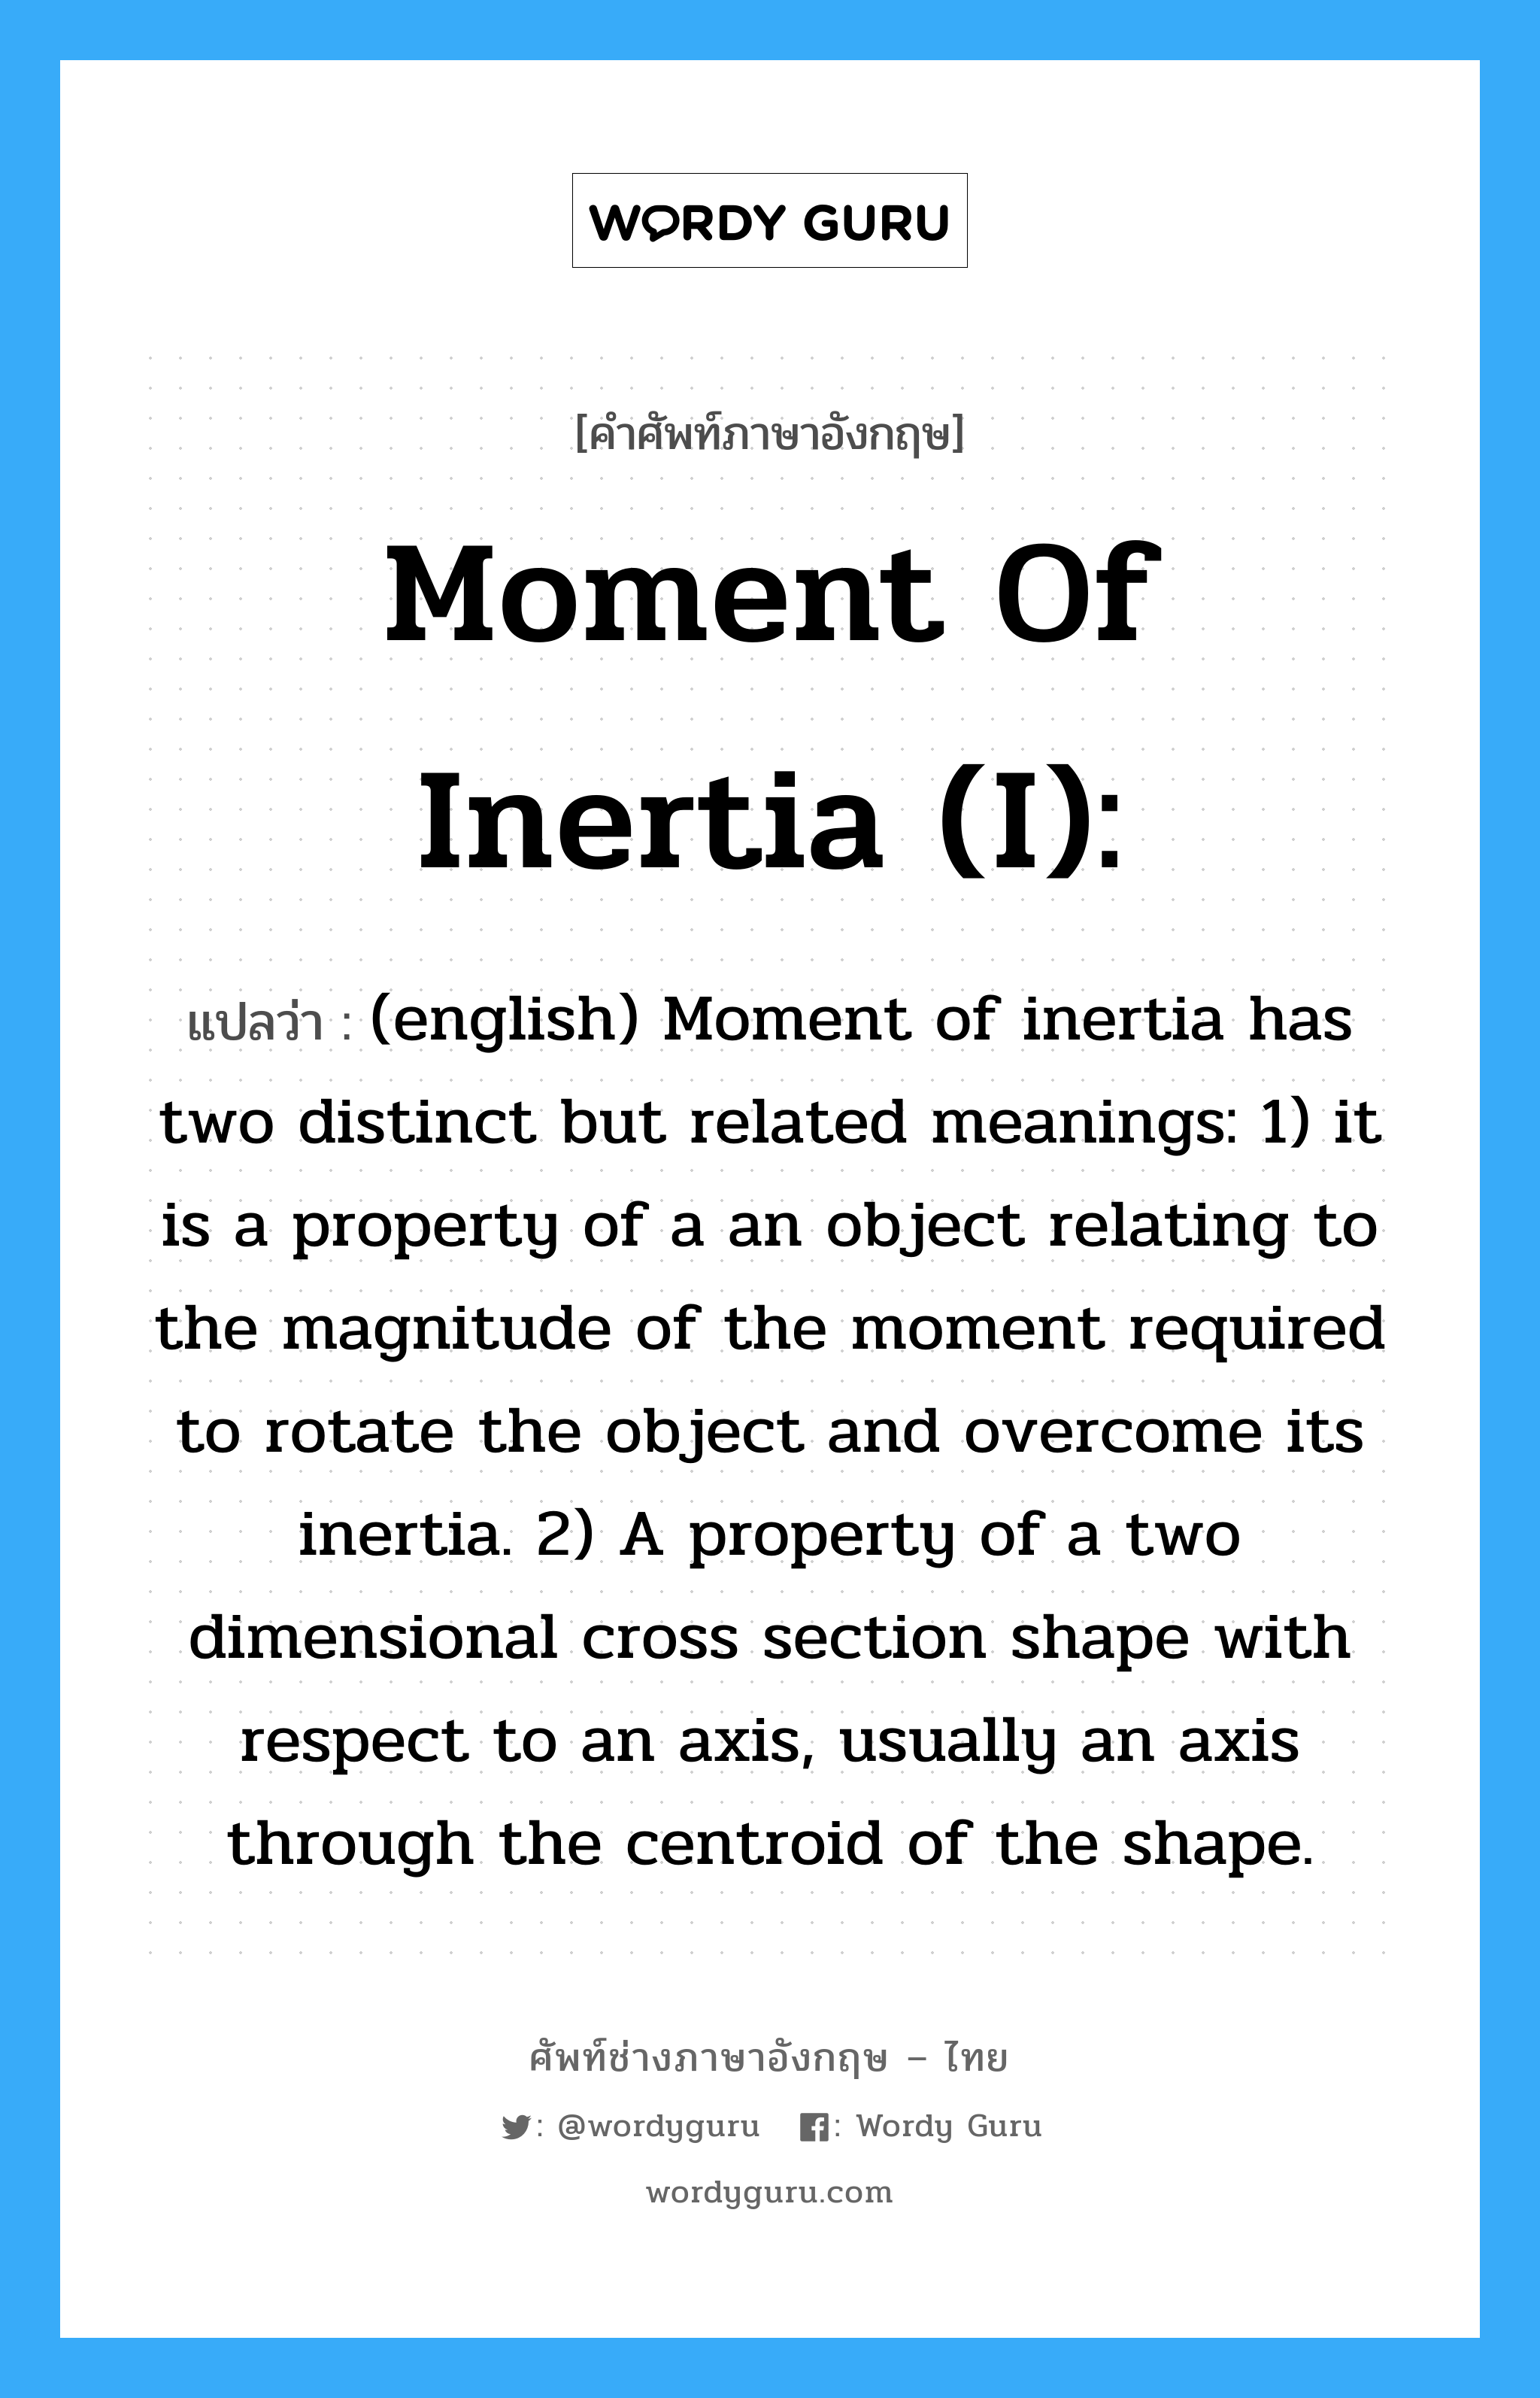 (english) Moment of inertia has two distinct but related meanings: 1) it is a property of a an object relating to the magnitude of the moment required to rotate the object and overcome its inertia. 2) A property of a two dimensional cross section shape with respect to an axis, usually an axis through the centroid of the shape. ภาษาอังกฤษ?, คำศัพท์ช่างภาษาอังกฤษ - ไทย (english) Moment of inertia has two distinct but related meanings: 1) it is a property of a an object relating to the magnitude of the moment required to rotate the object and overcome its inertia. 2) A property of a two dimensional cross section shape with respect to an axis, usually an axis through the centroid of the shape. คำศัพท์ภาษาอังกฤษ (english) Moment of inertia has two distinct but related meanings: 1) it is a property of a an object relating to the magnitude of the moment required to rotate the object and overcome its inertia. 2) A property of a two dimensional cross section shape with respect to an axis, usually an axis through the centroid of the shape. แปลว่า Moment of inertia (I):